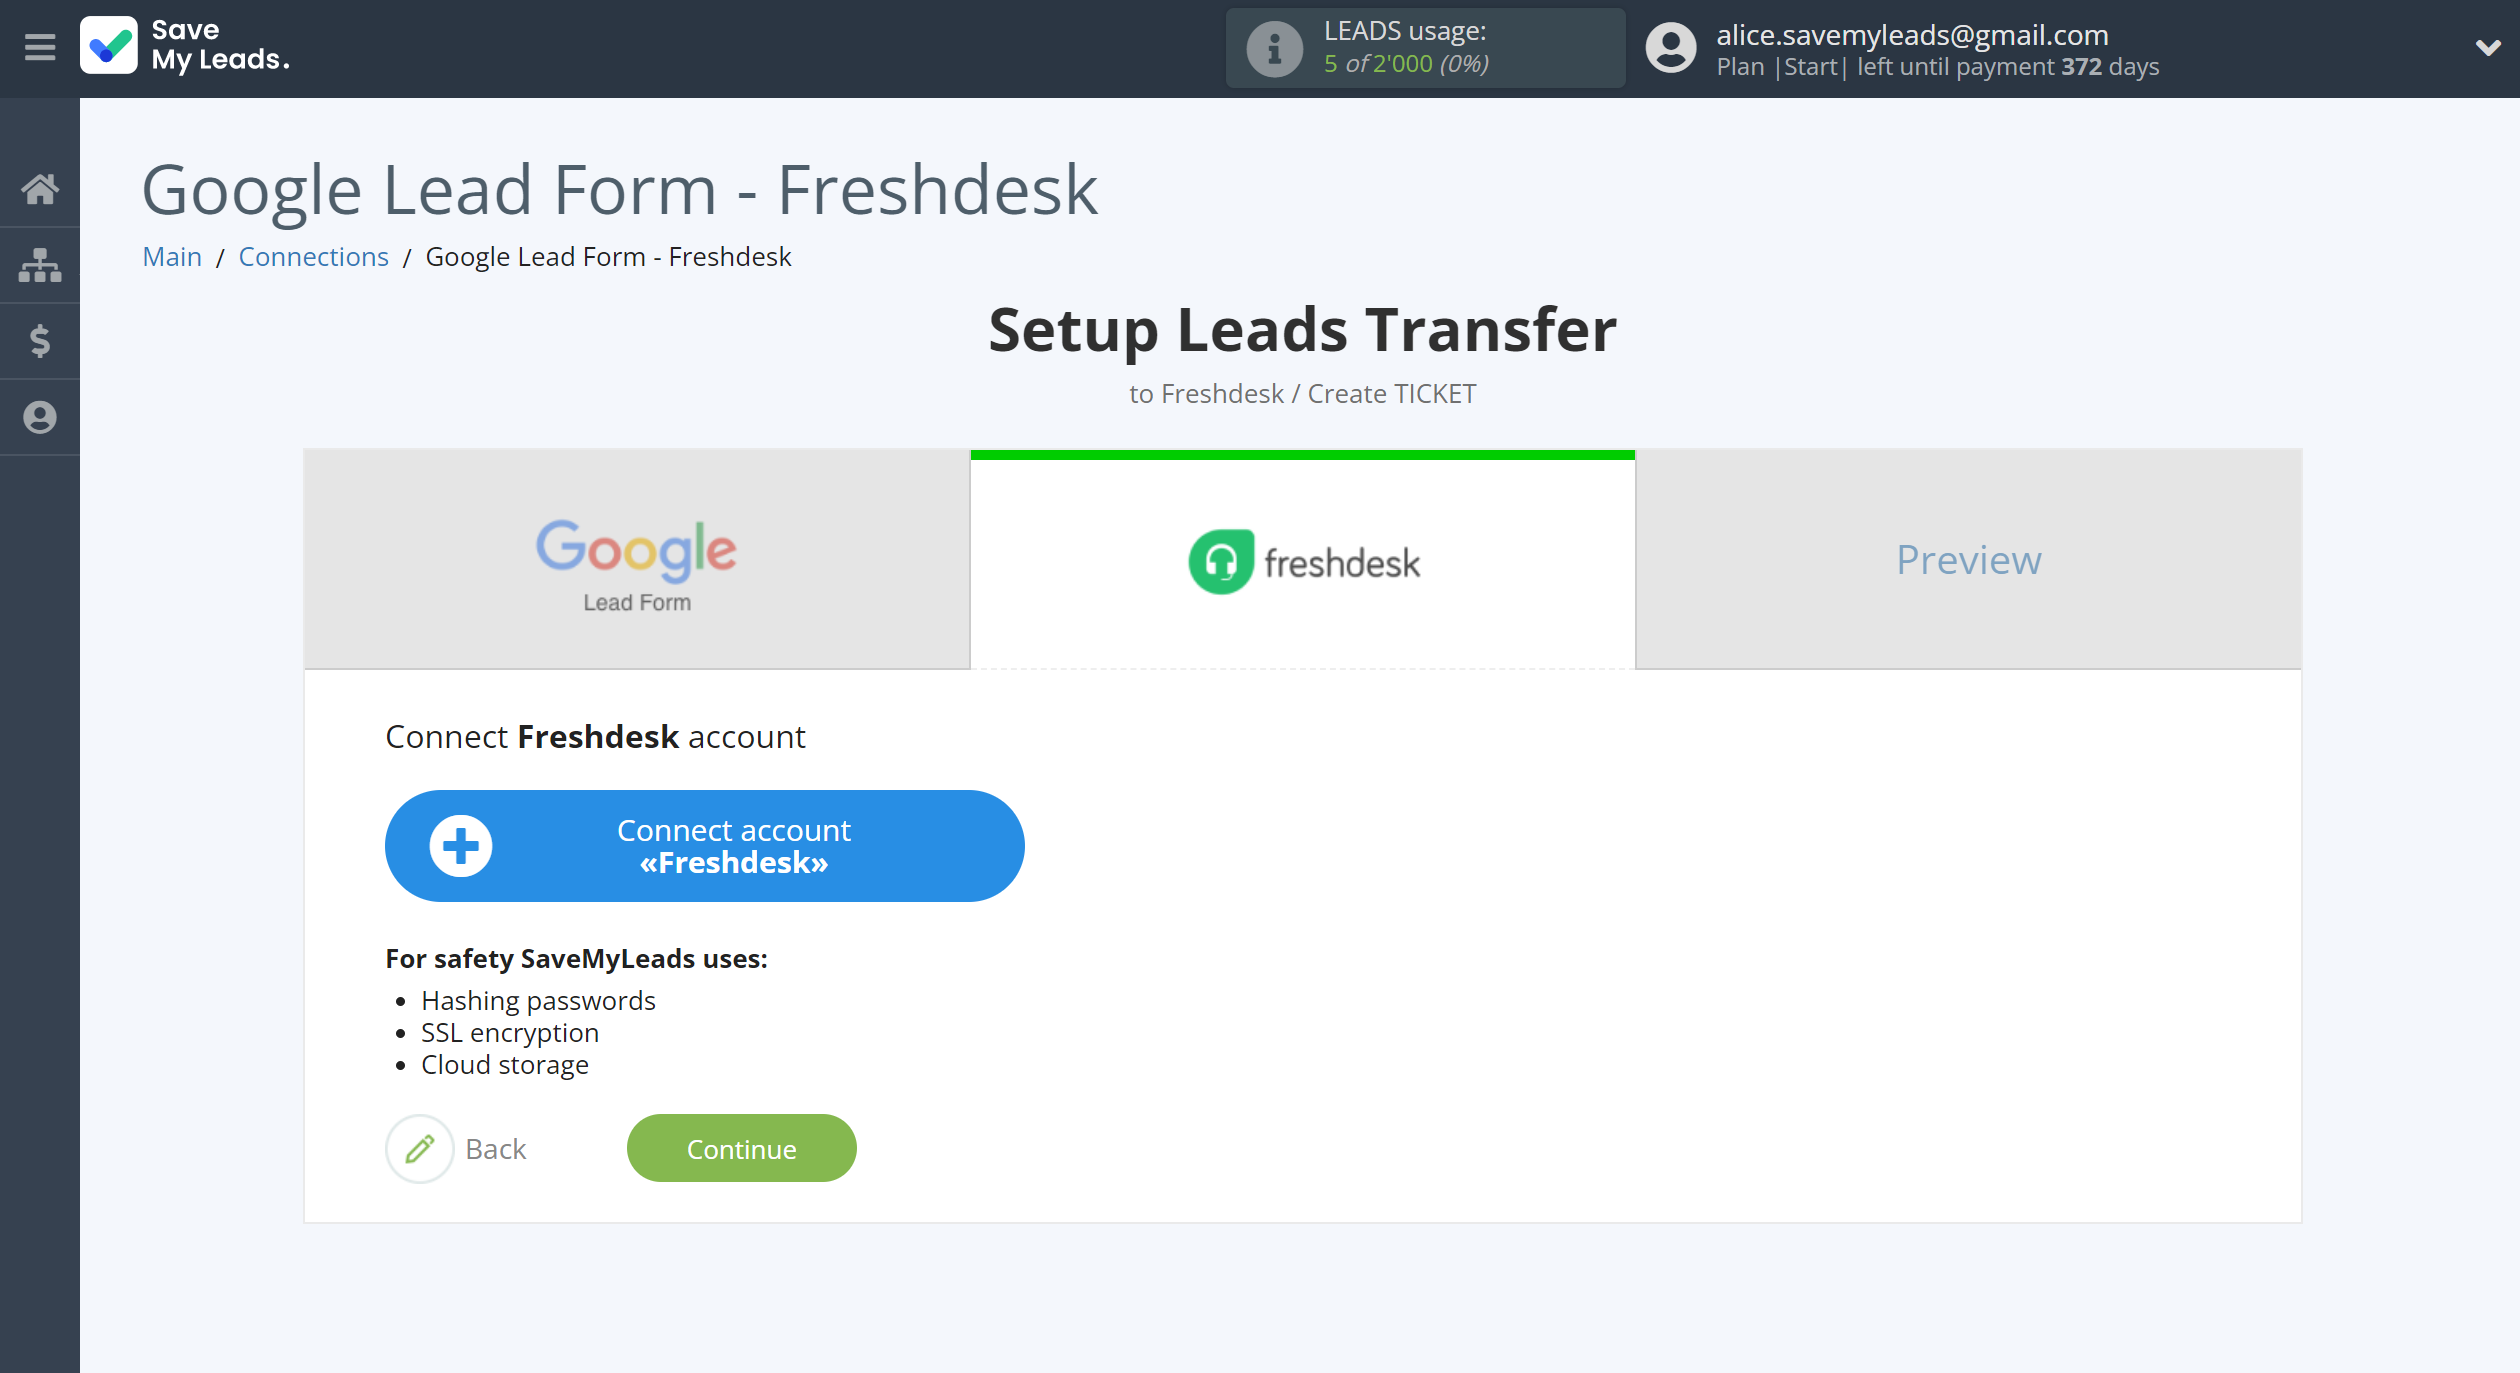 How to Connect Google Lead Form with Freshdesk Create Ticket | Data Destination account connection